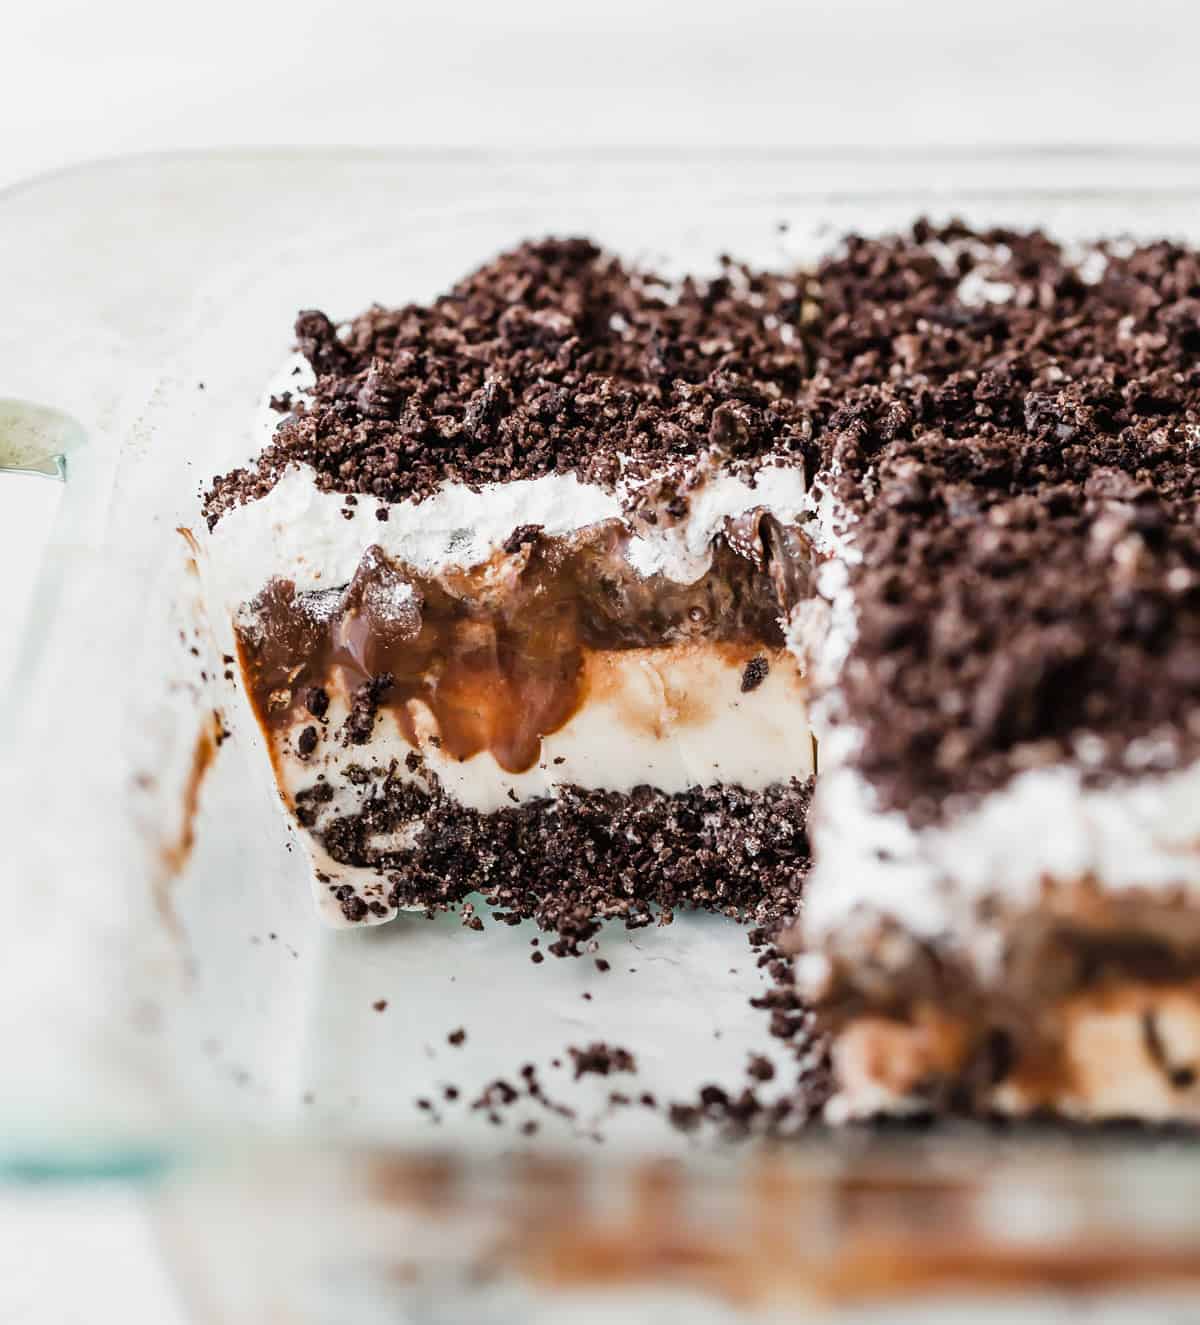 Oreo Ice Cream Cake in a glass baking dish against a white background.